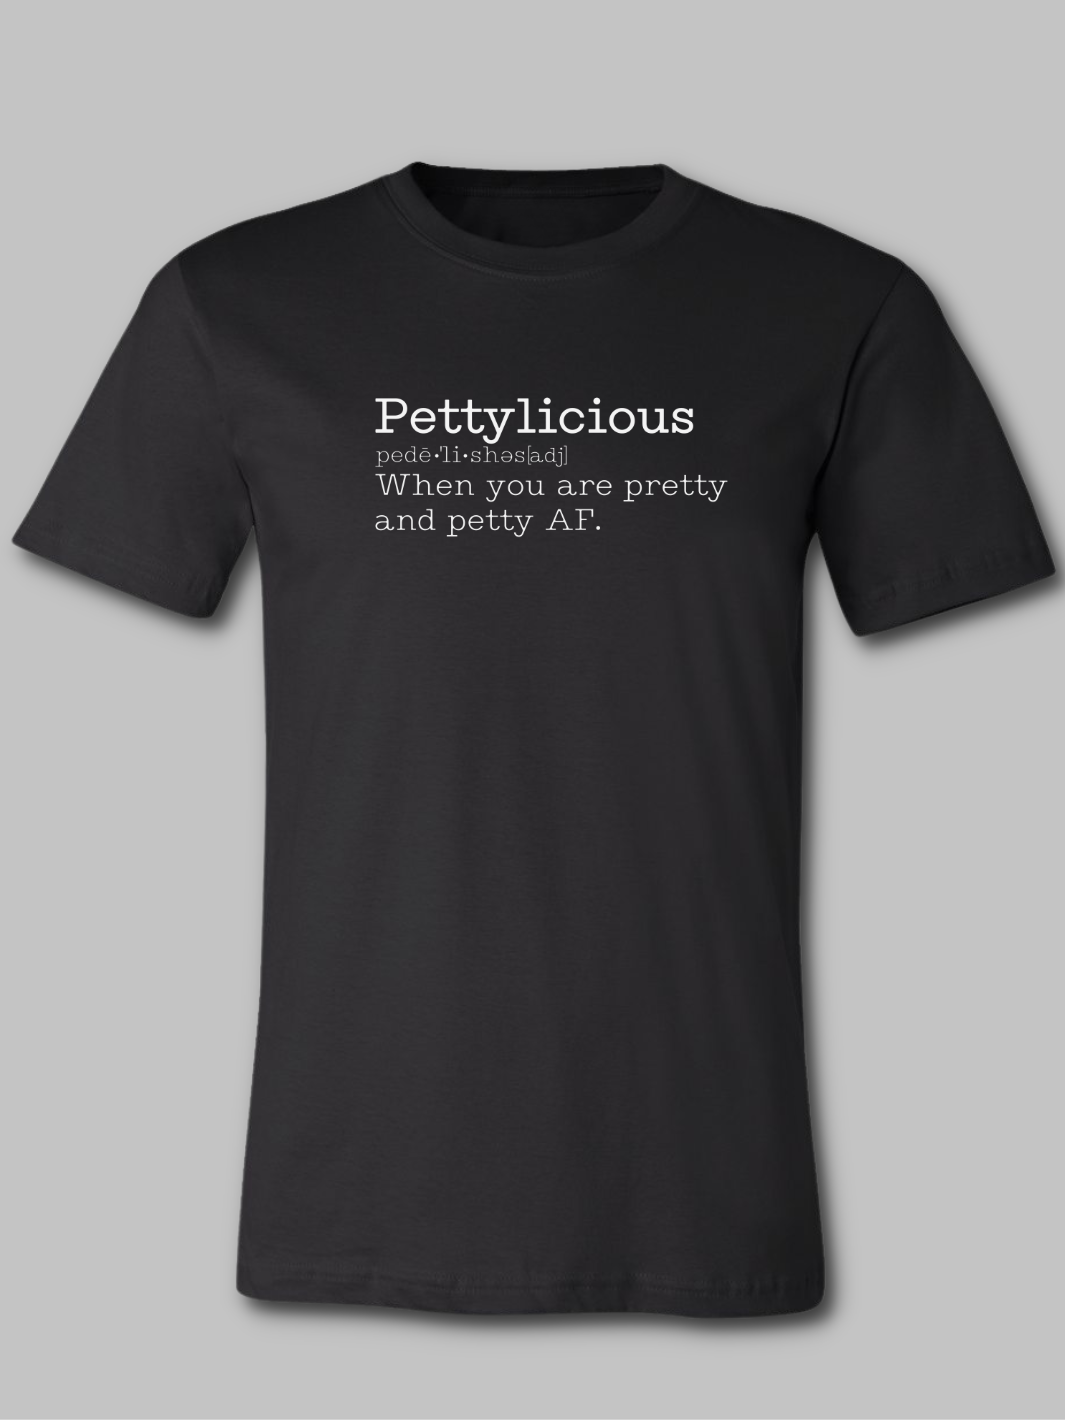 Image of a black unisex crewneck t-shirt featuring the word 'Pettylicious' in a classic white typewriter font. The playful and bold text contrasts sharply against the crisp white background of the shirt, creating a striking visual effect. The typewriter font adds a vintage, yet modern, flair to the design, emphasizing the quirky and humorous nature of the message. Sarcastic t-shirt, Petty T-shirt